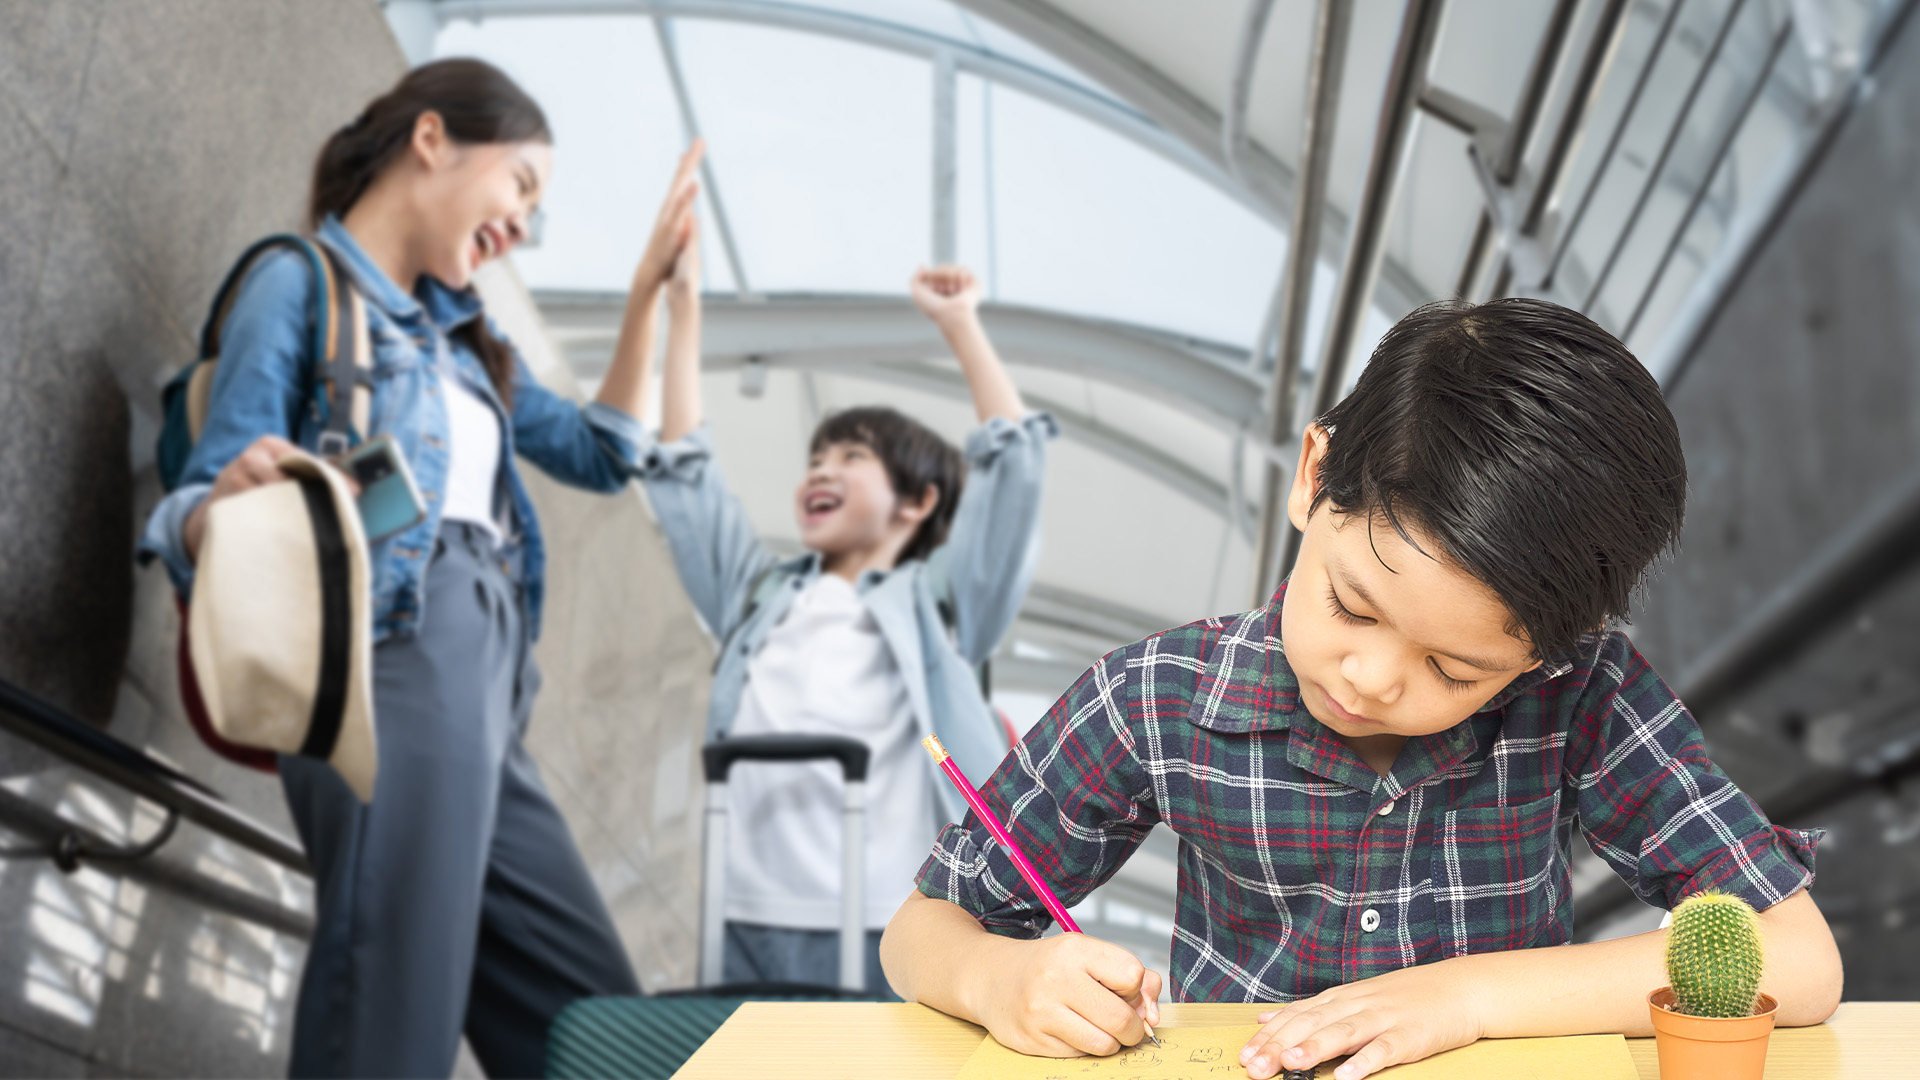 As social attitudes change, the Post delves into the emergence of a negative term  in South Korea which labels people who apply themselves strictly to studies or work as “perfect attendance beggars”. Photo: SCMP composite/Shutterstock